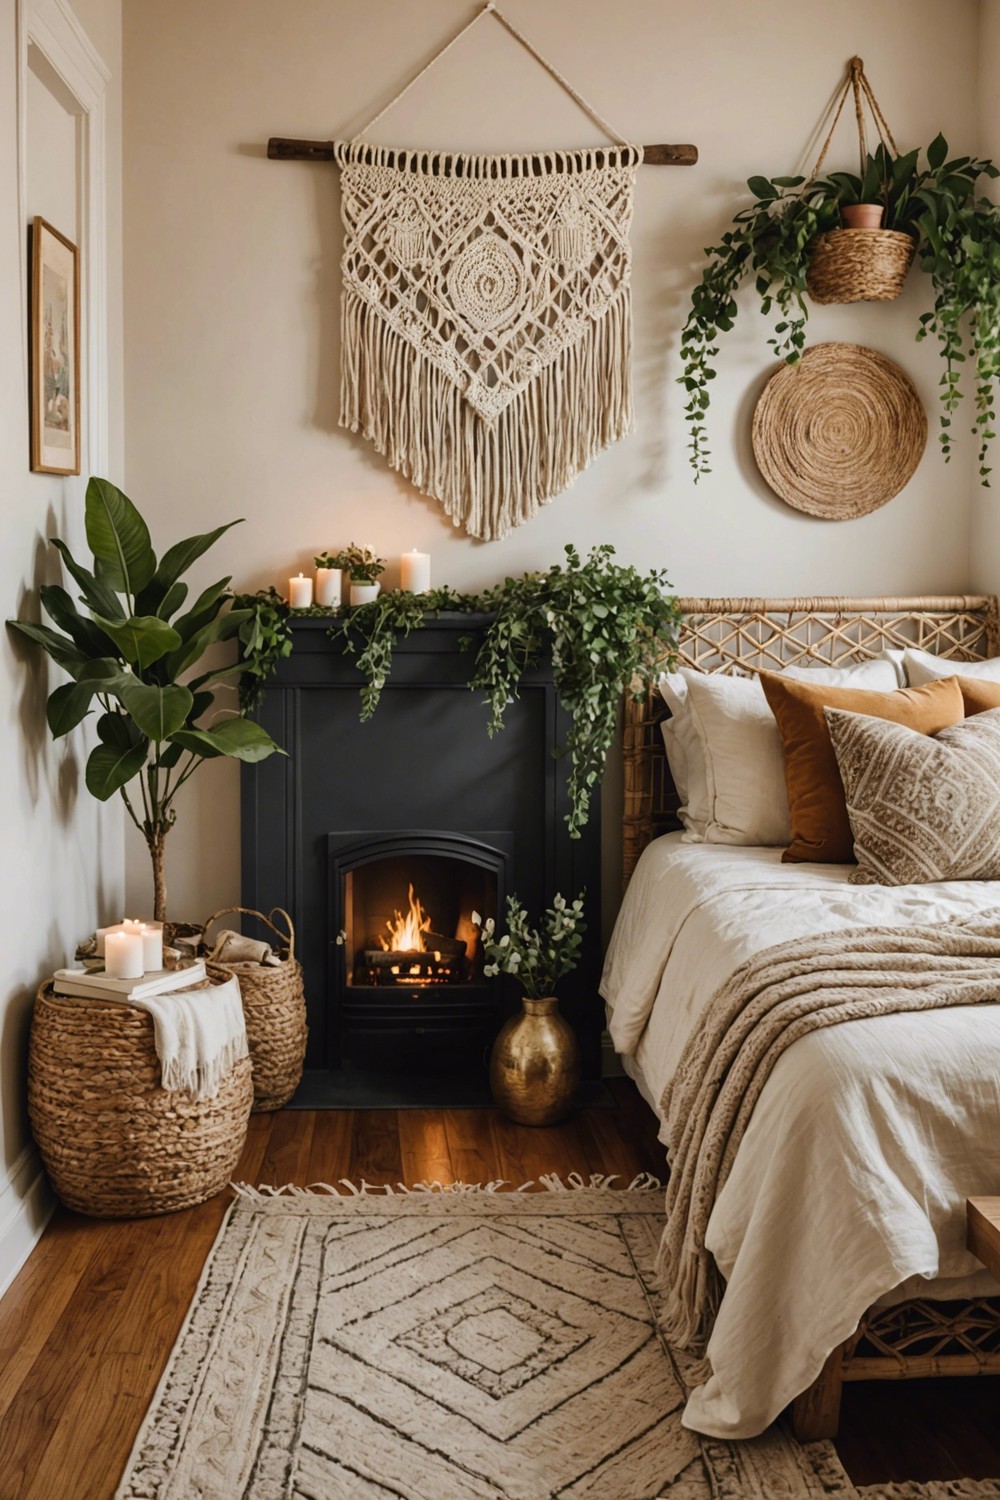 Woven Wonders with Macrame and Wicker: